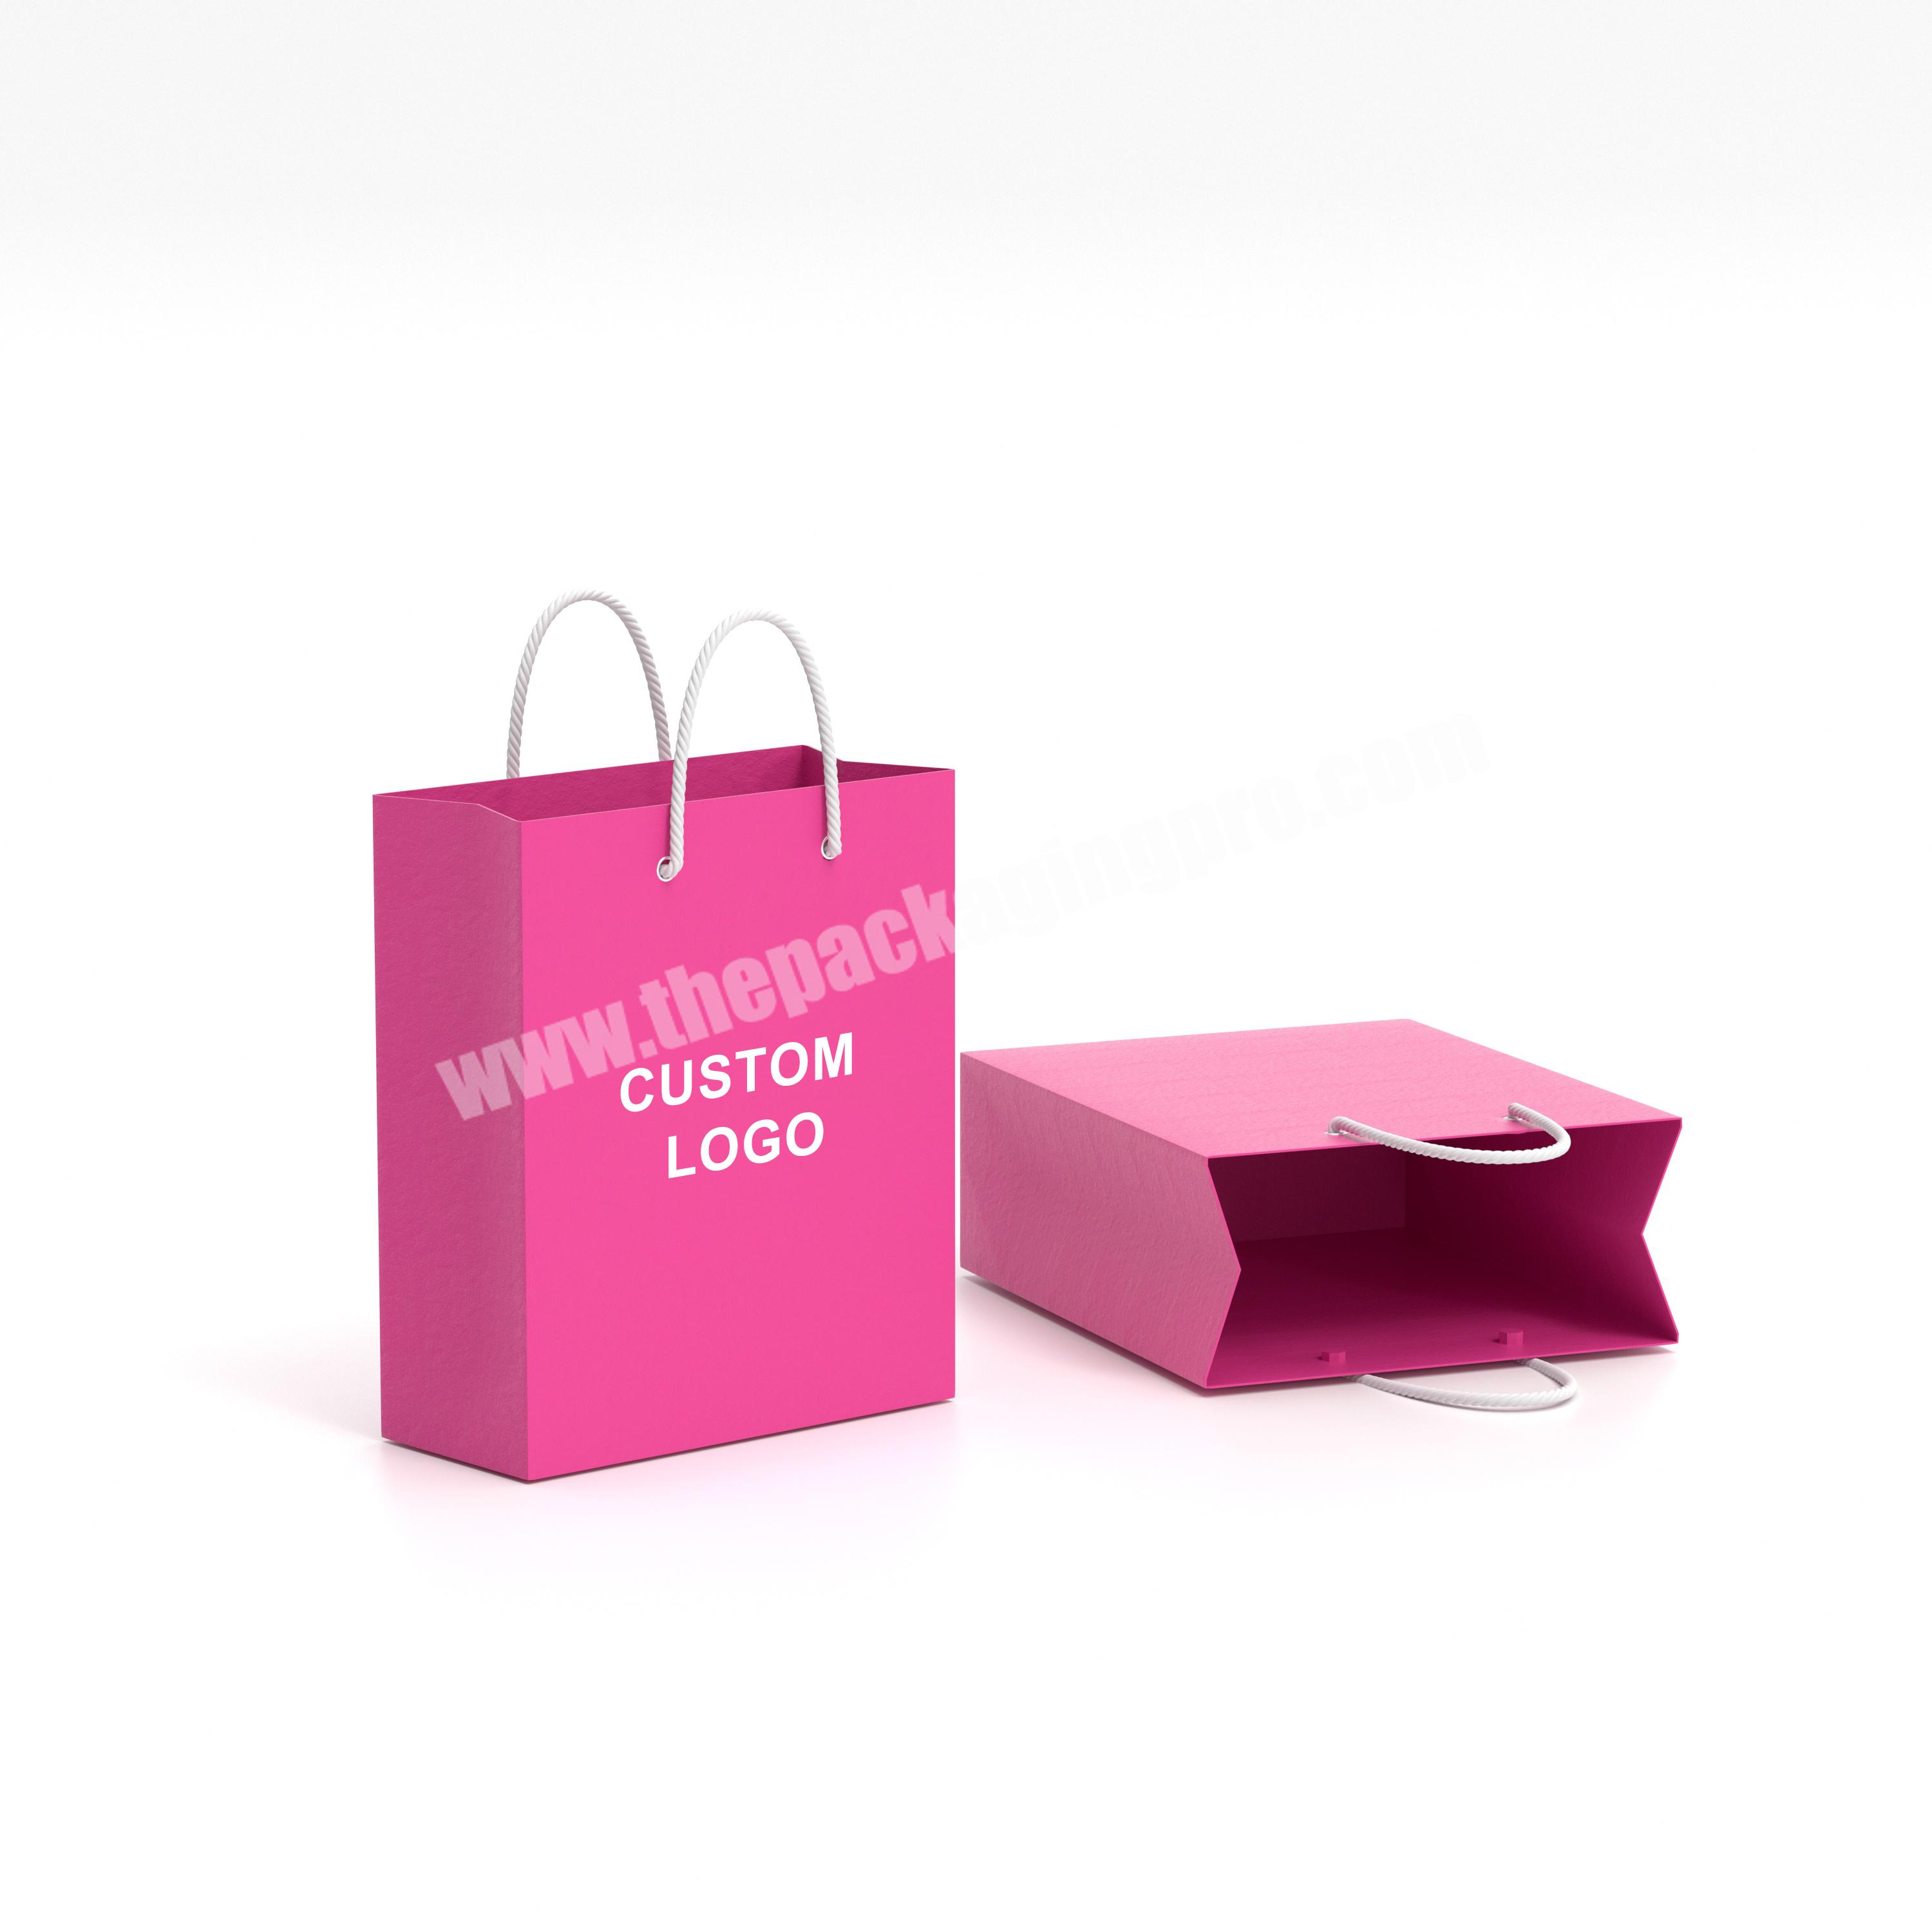 Lead the industry wholesale price handbag mystery box packaging bag package paper logo souvenir party shopping bags gift